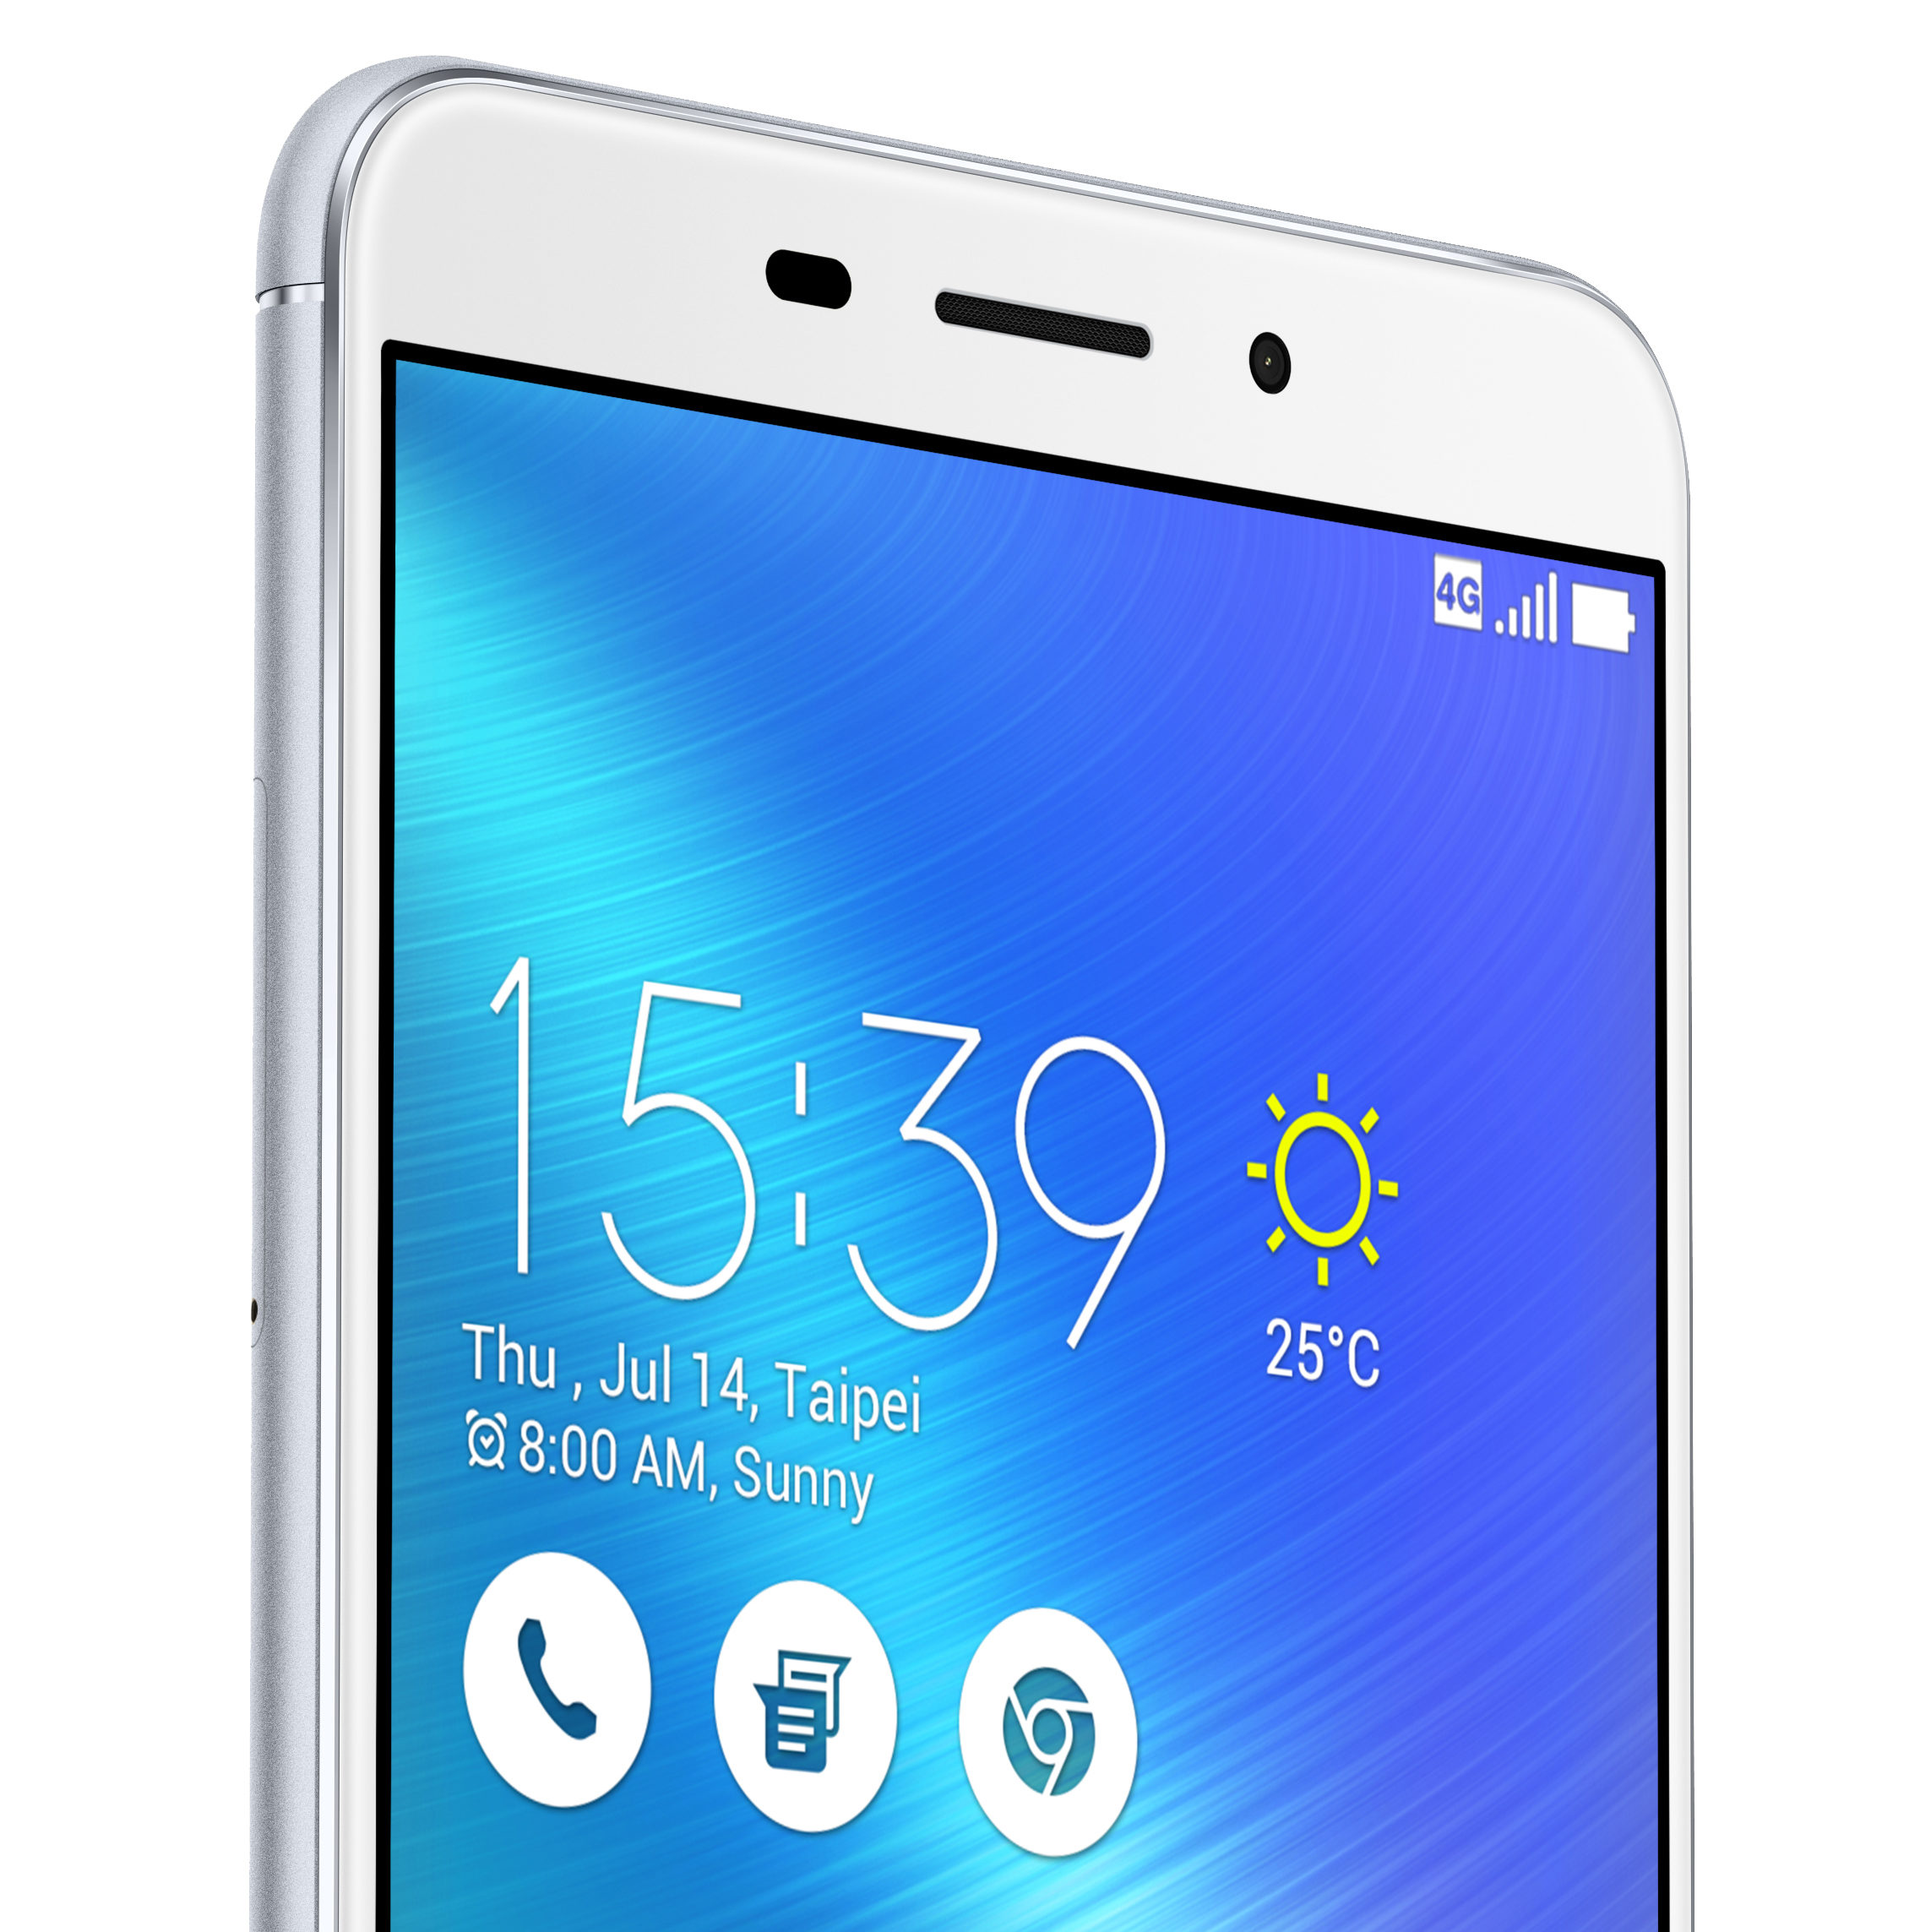 Asus Zenfone 3 Laser Zc551kl Goes For Sale In India At Rs 199